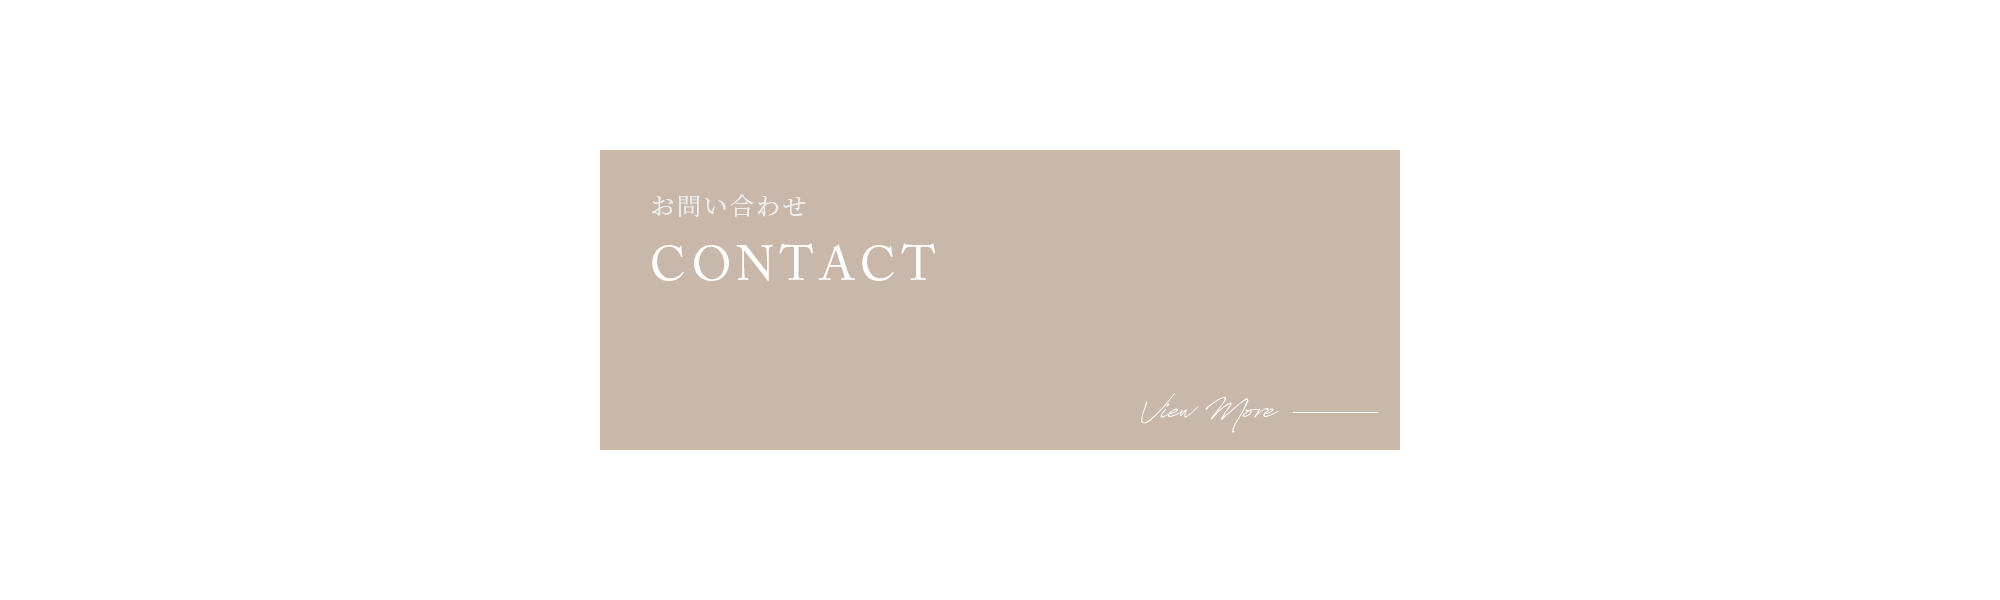 banner_contact_on_def